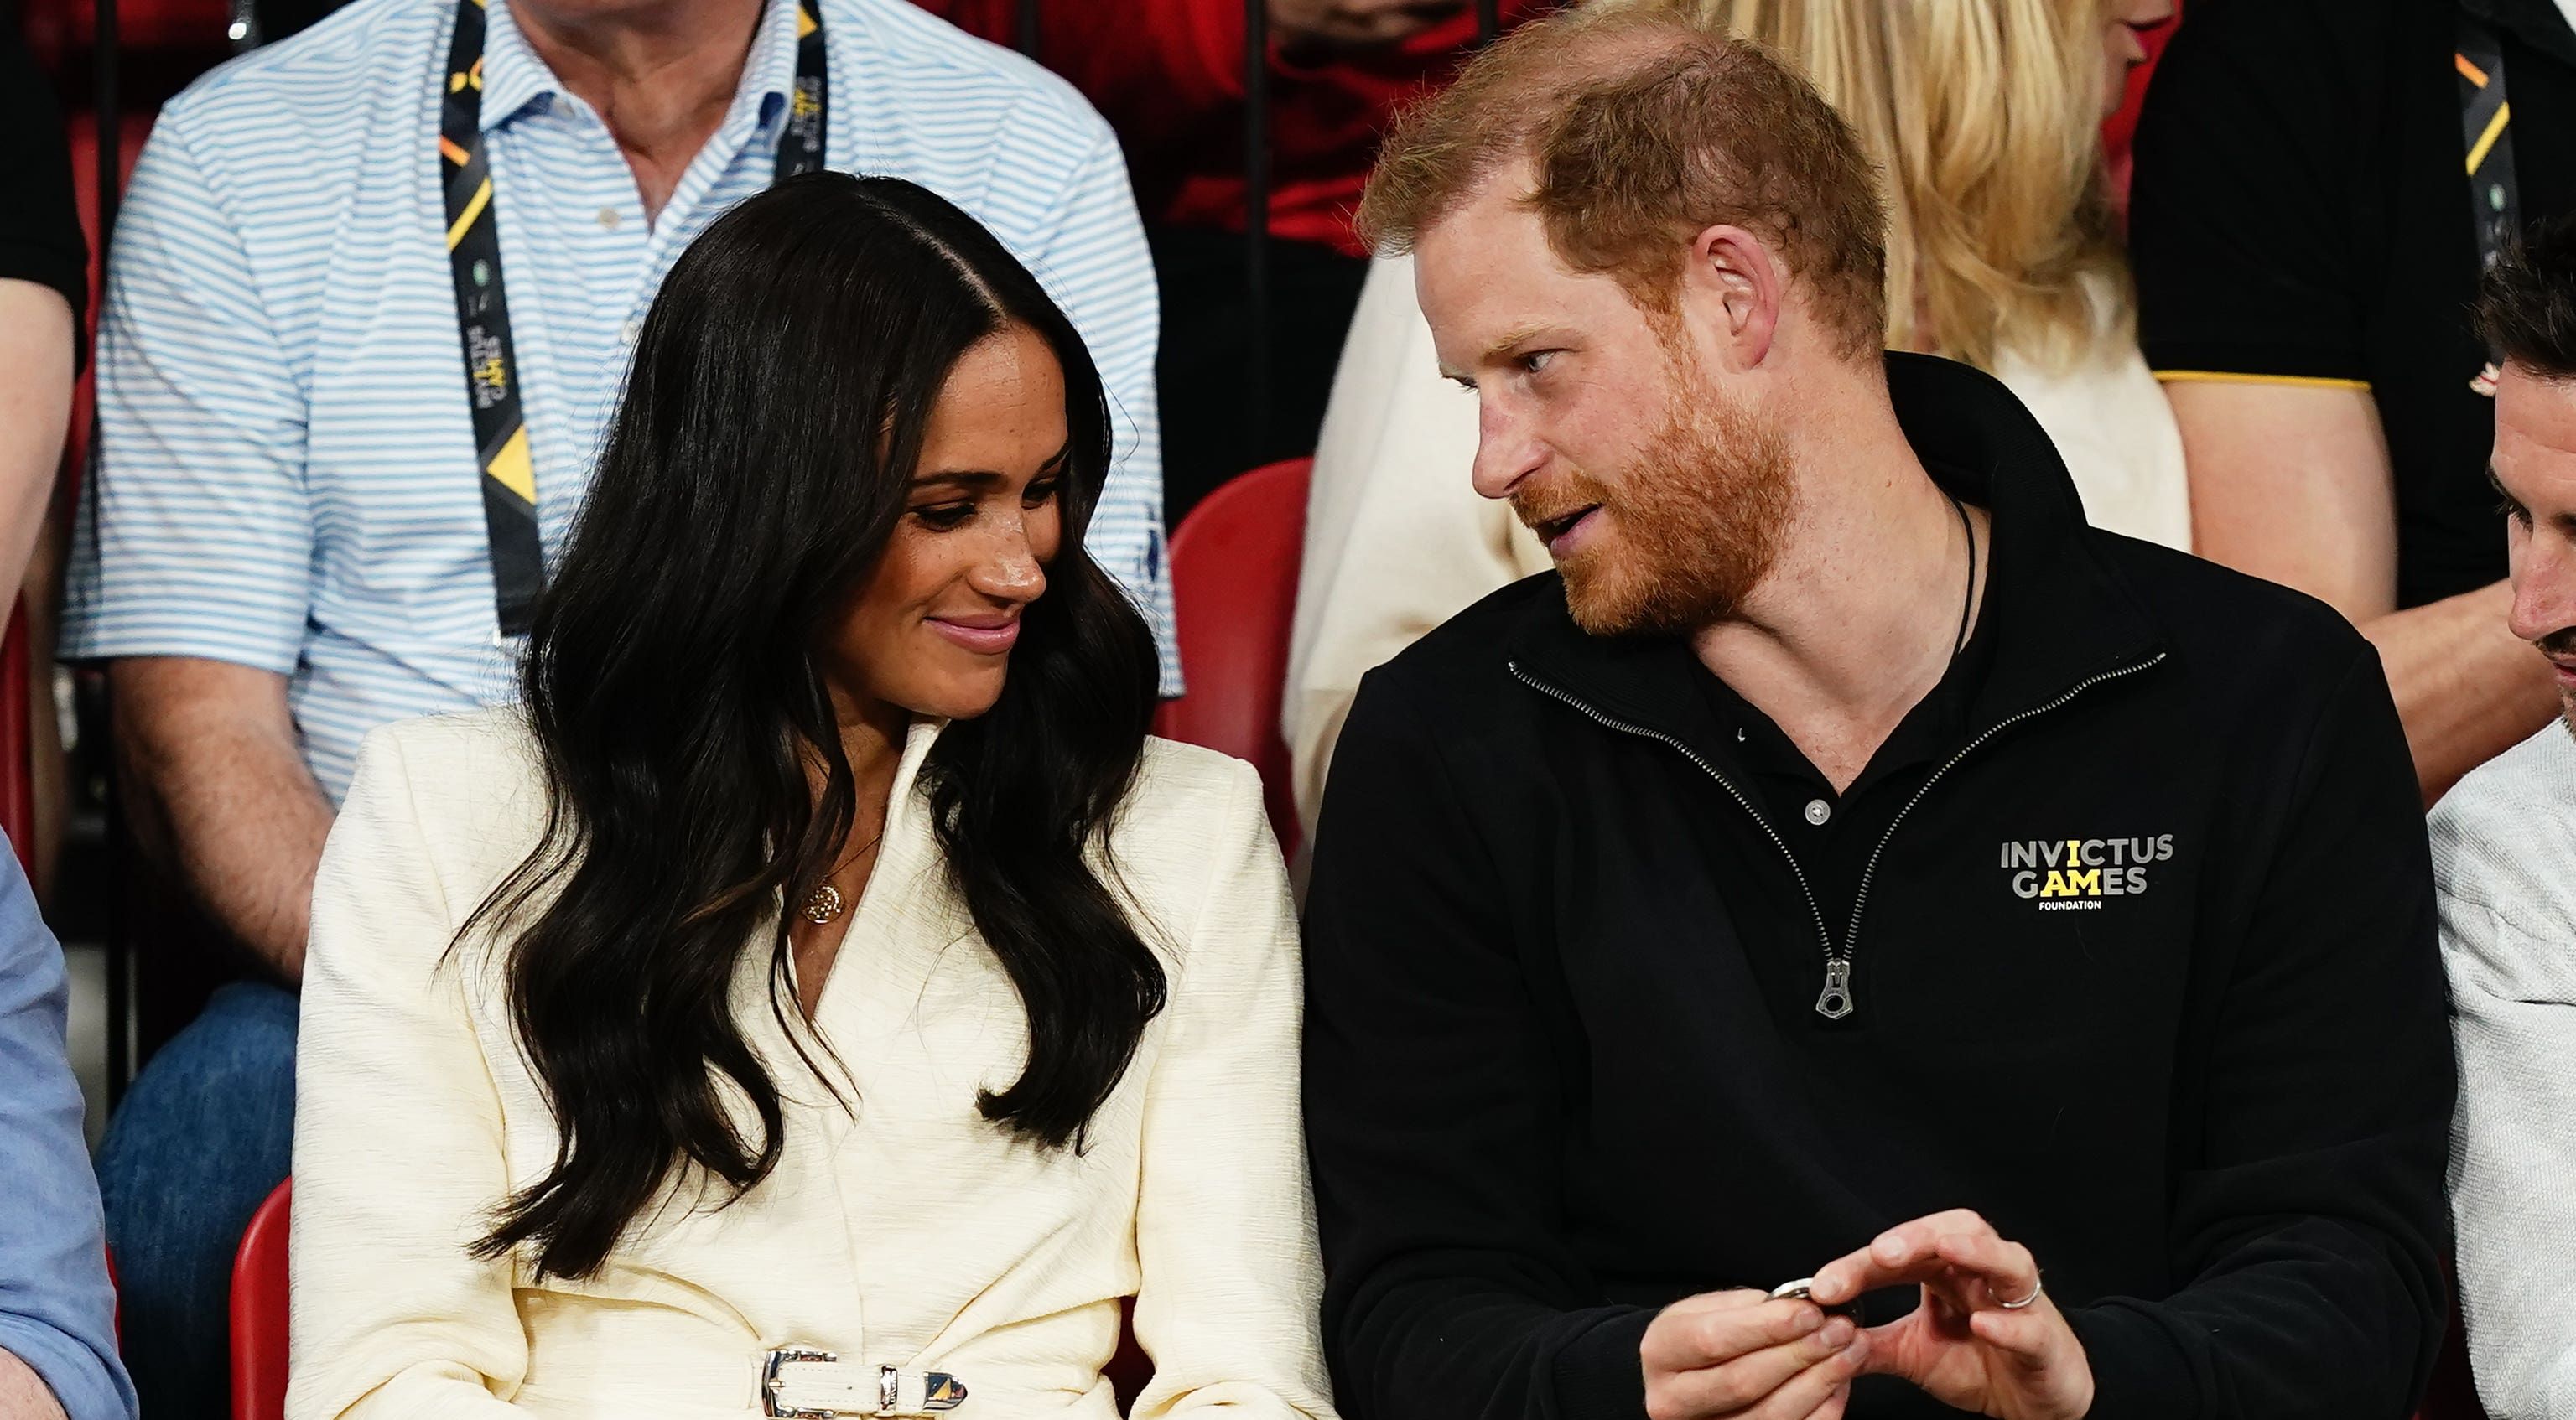 Bf89 - Harry and Meghan's popularity with the British public hits record low |  BelfastTelegraph.co.uk